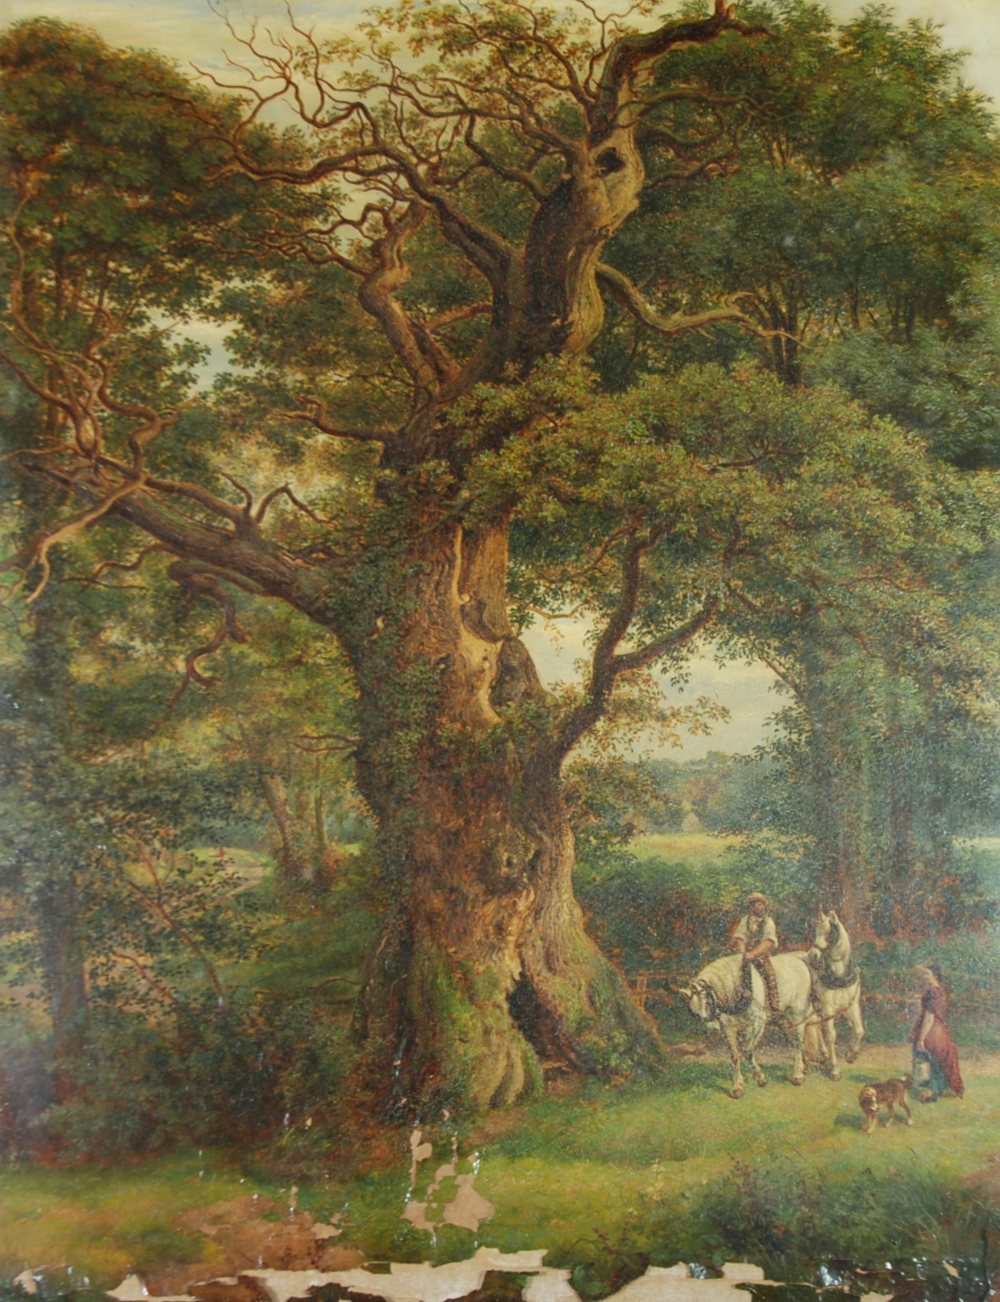 ATTRIBUTED TO FREDERICK HENRY HENSHAW (1807 - 1891) OIL PAINTING ON CANVAS A wooded landscape